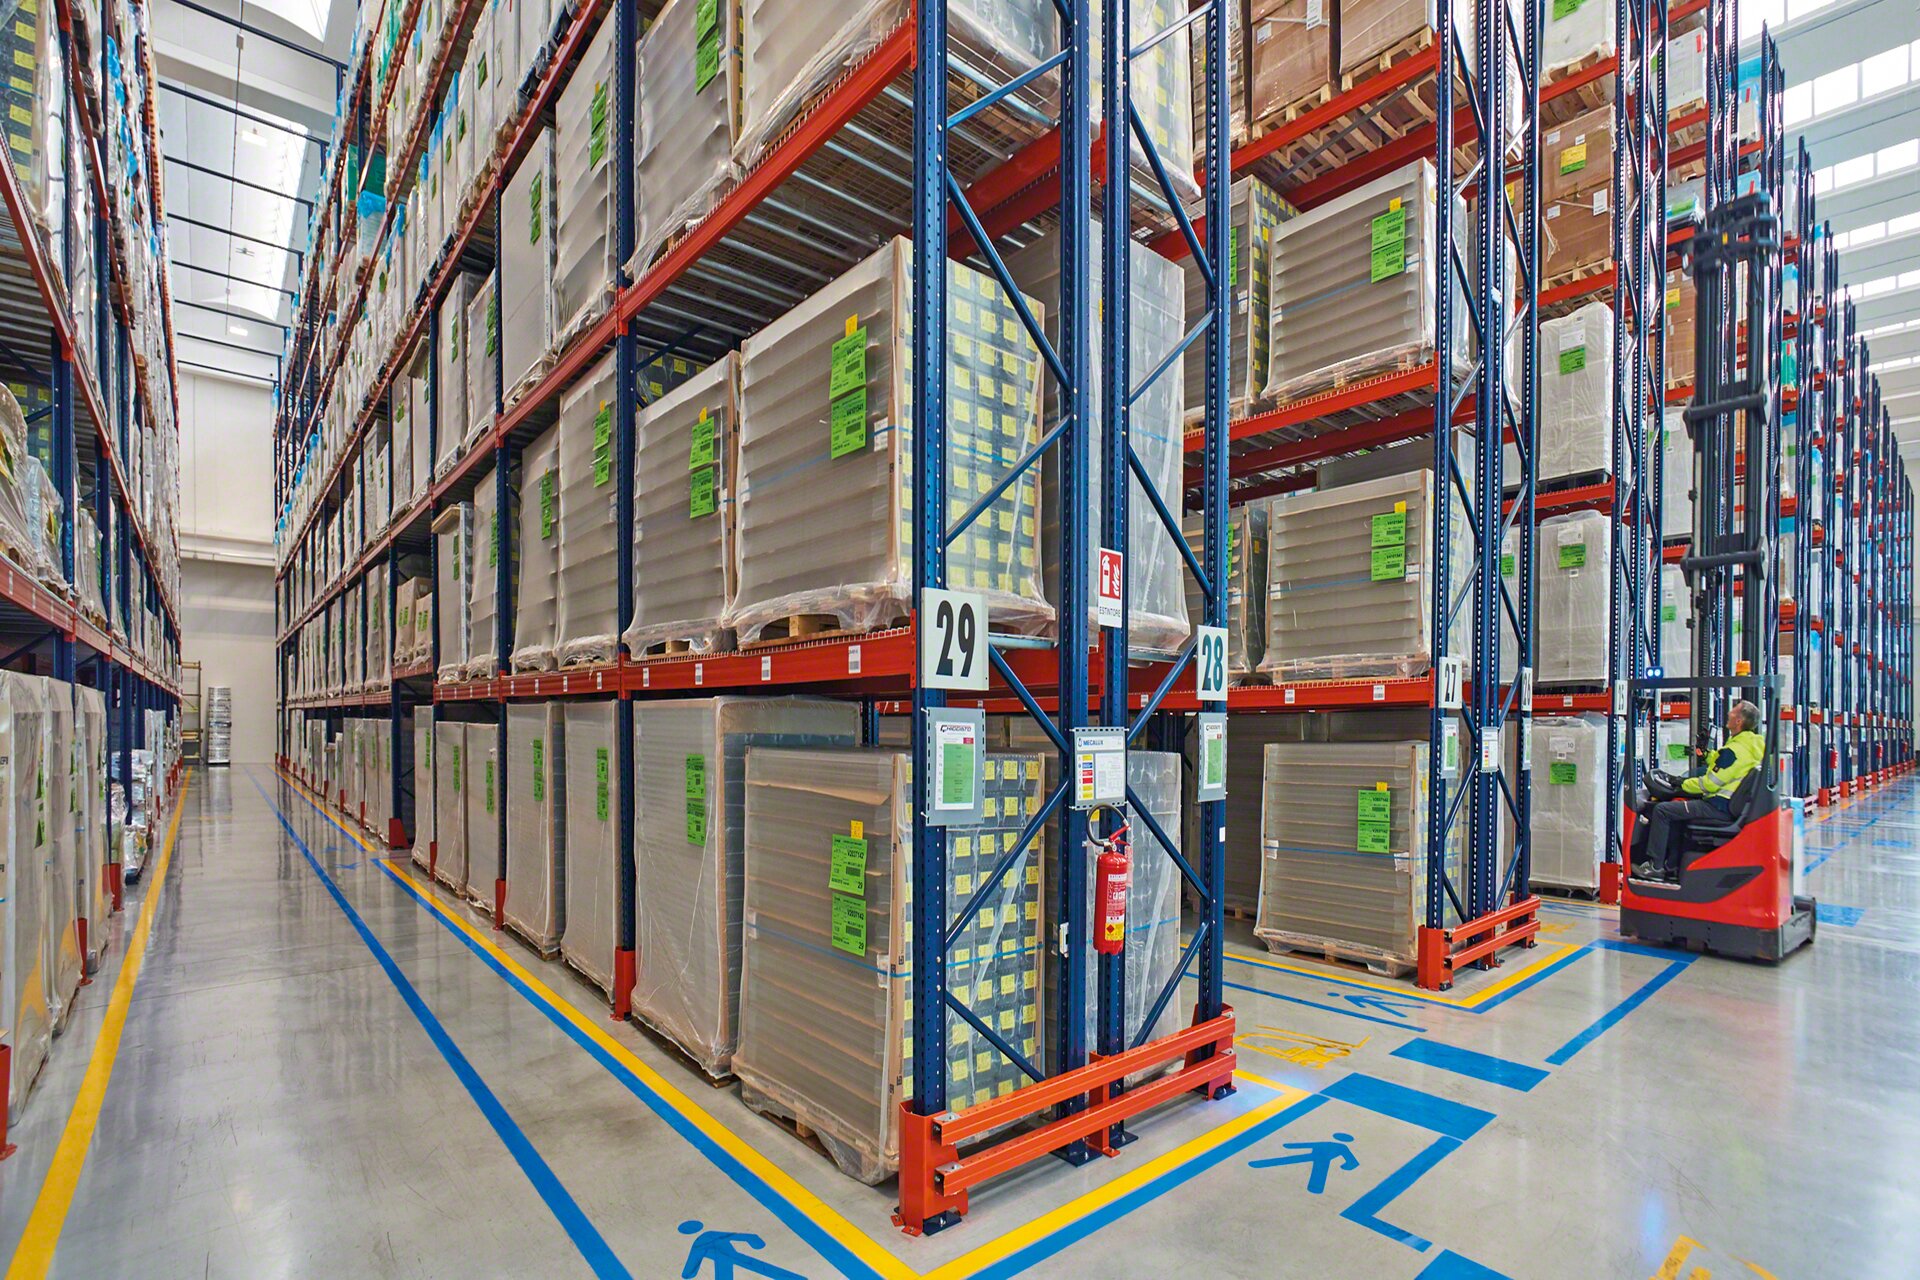 Signaling varies in the warehouse aisles and increases operator safety